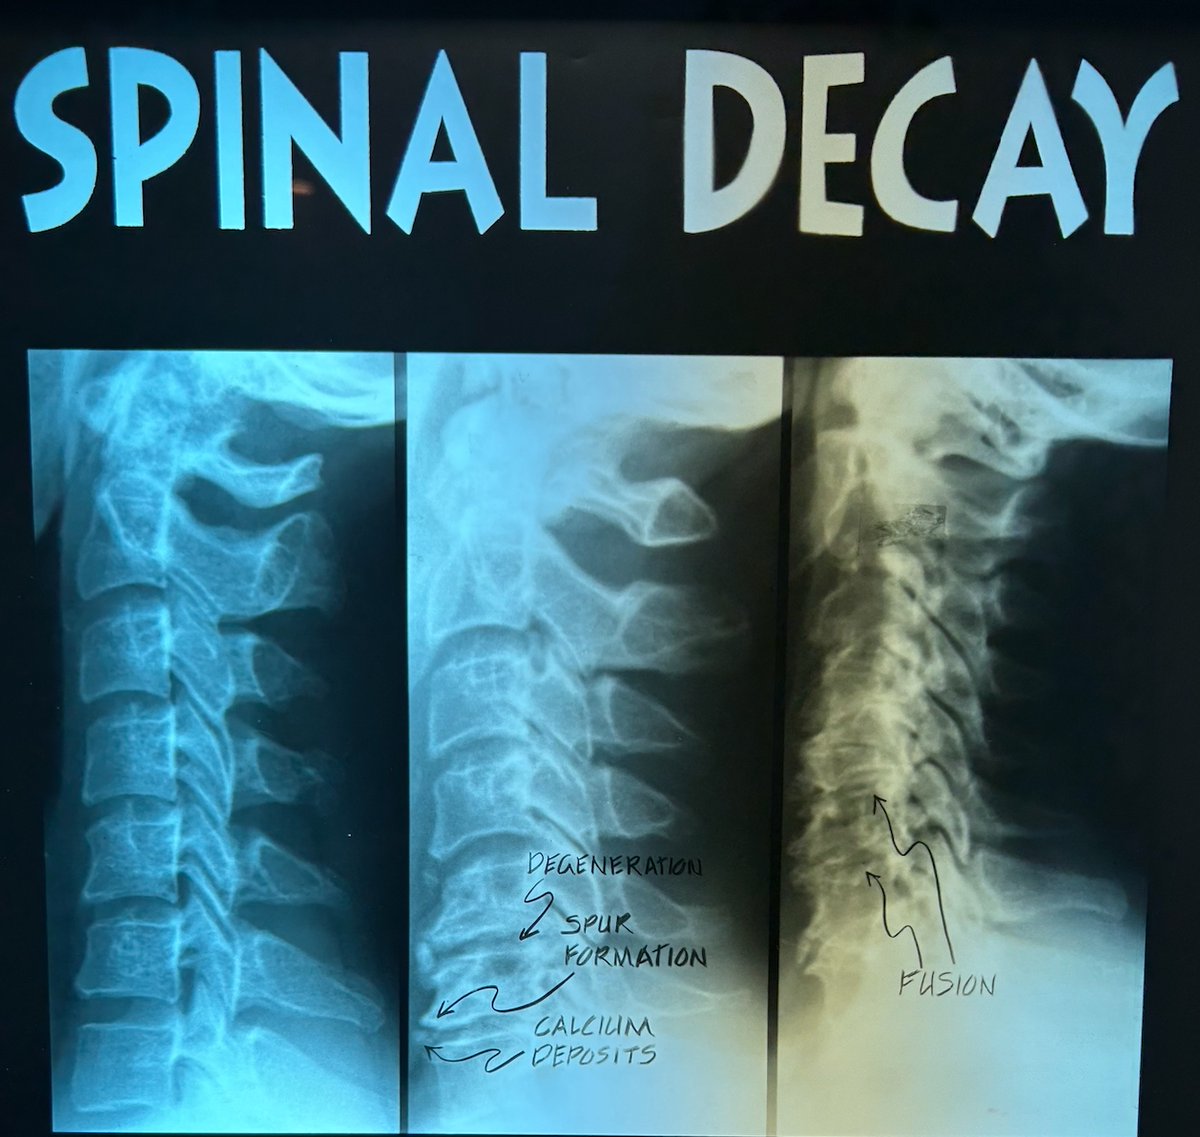 Chiropractic care is a preferred treatment option for degenerative disc disease for a variety of reasons.

#abetterwaychiropractic #abetterway #betterthandrugs #chiropractor #chiropractic #getadjusted #chiropracticadjustment #spinehealth #spine #chiropractortiktok #spinalhygiene